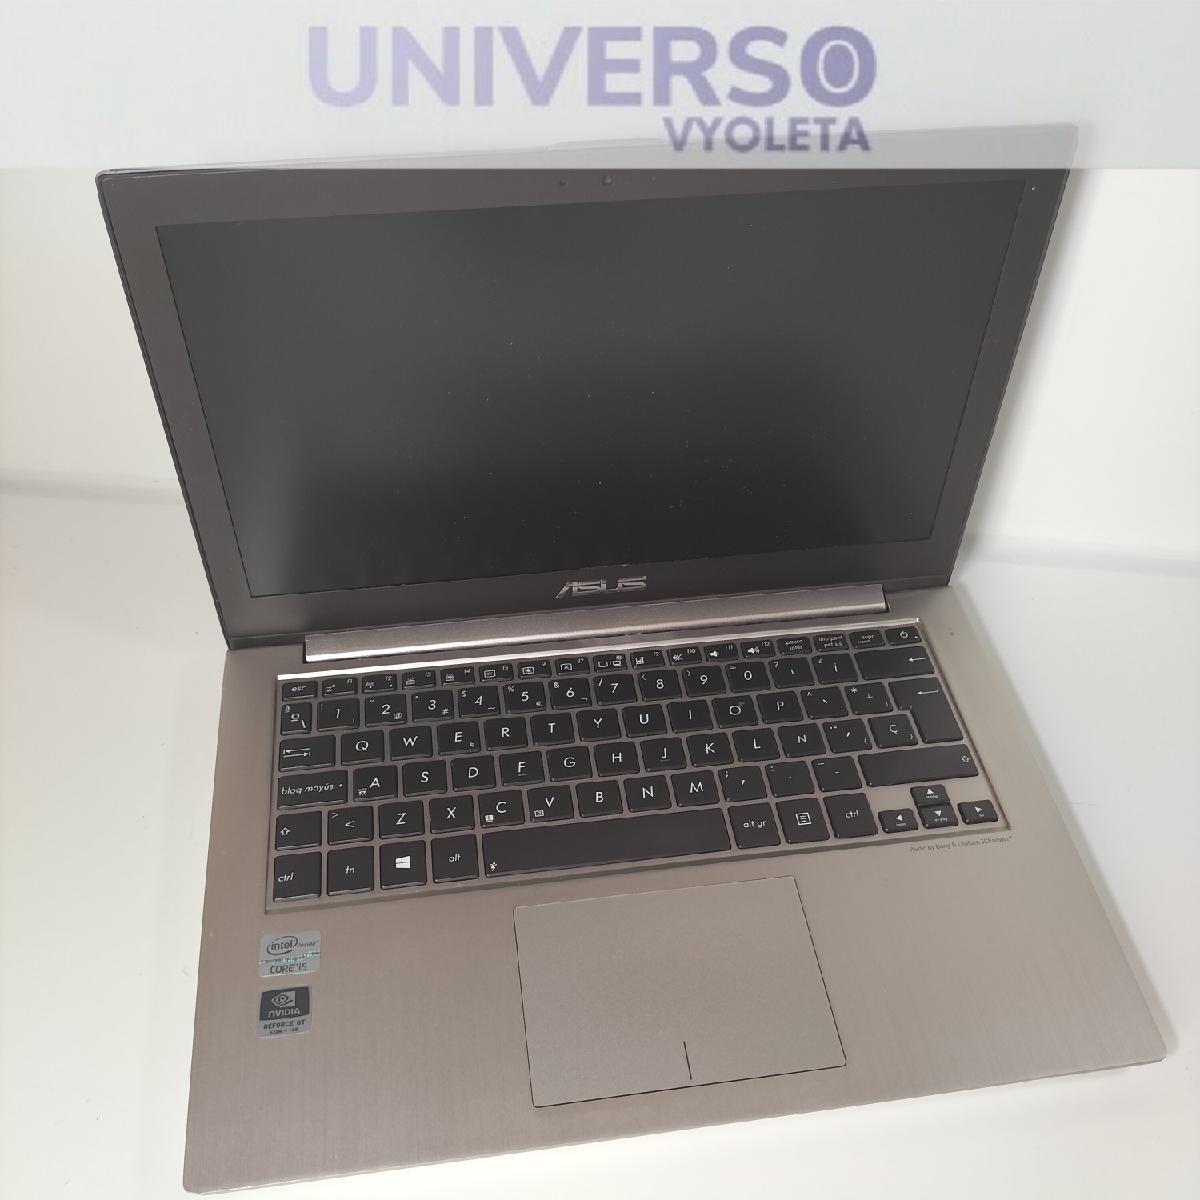 ASUS UX32V NoteBook PC_1